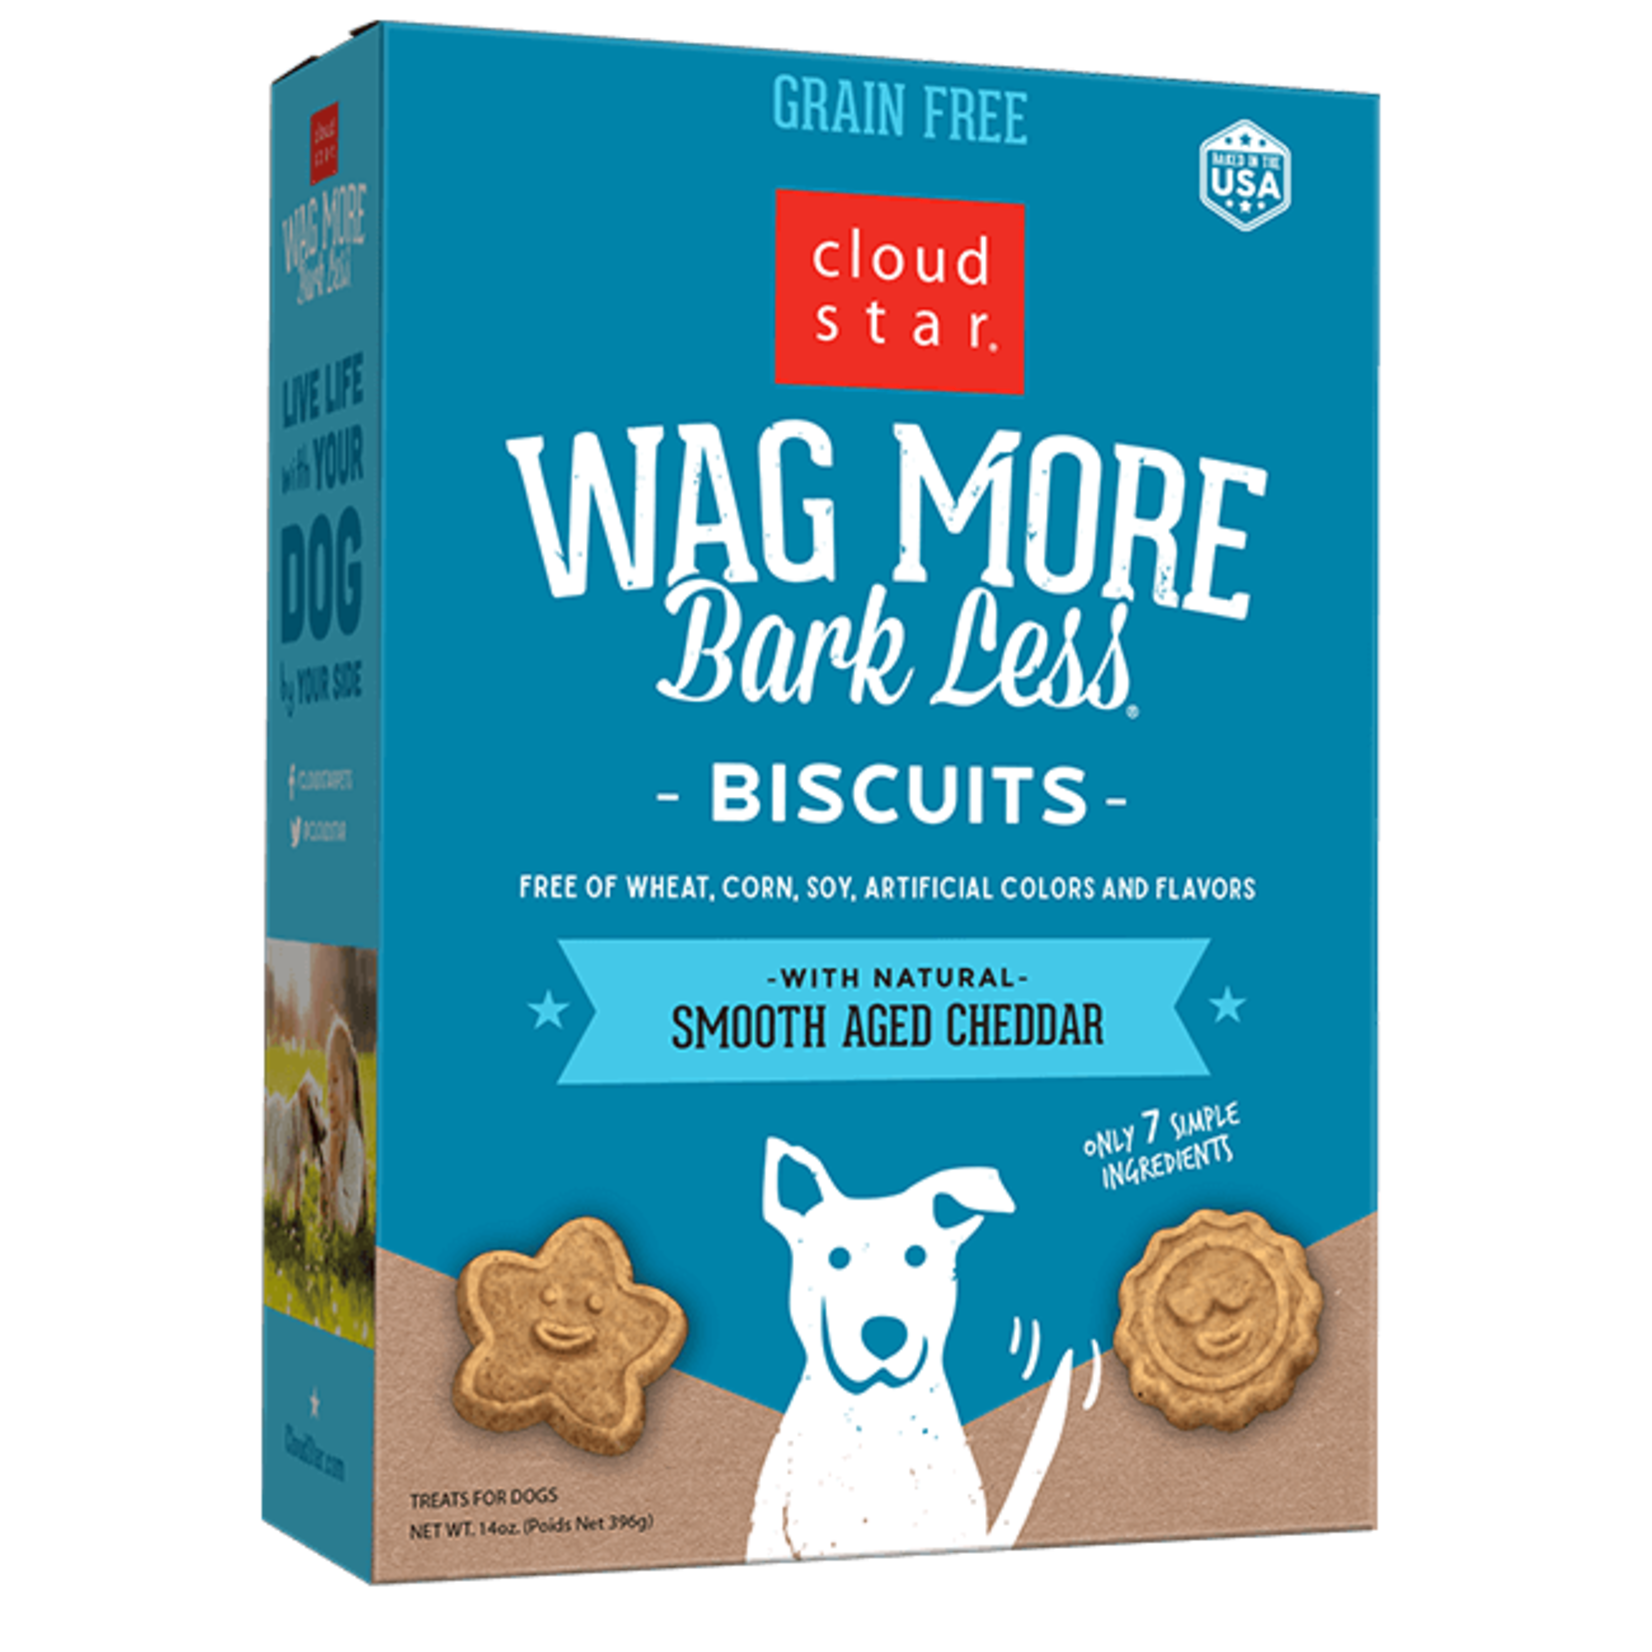 Cloud Star Wag More Bark Less Grain Free Oven Baked Dog Biscuits with Smooth Aged Cheddar 14oz